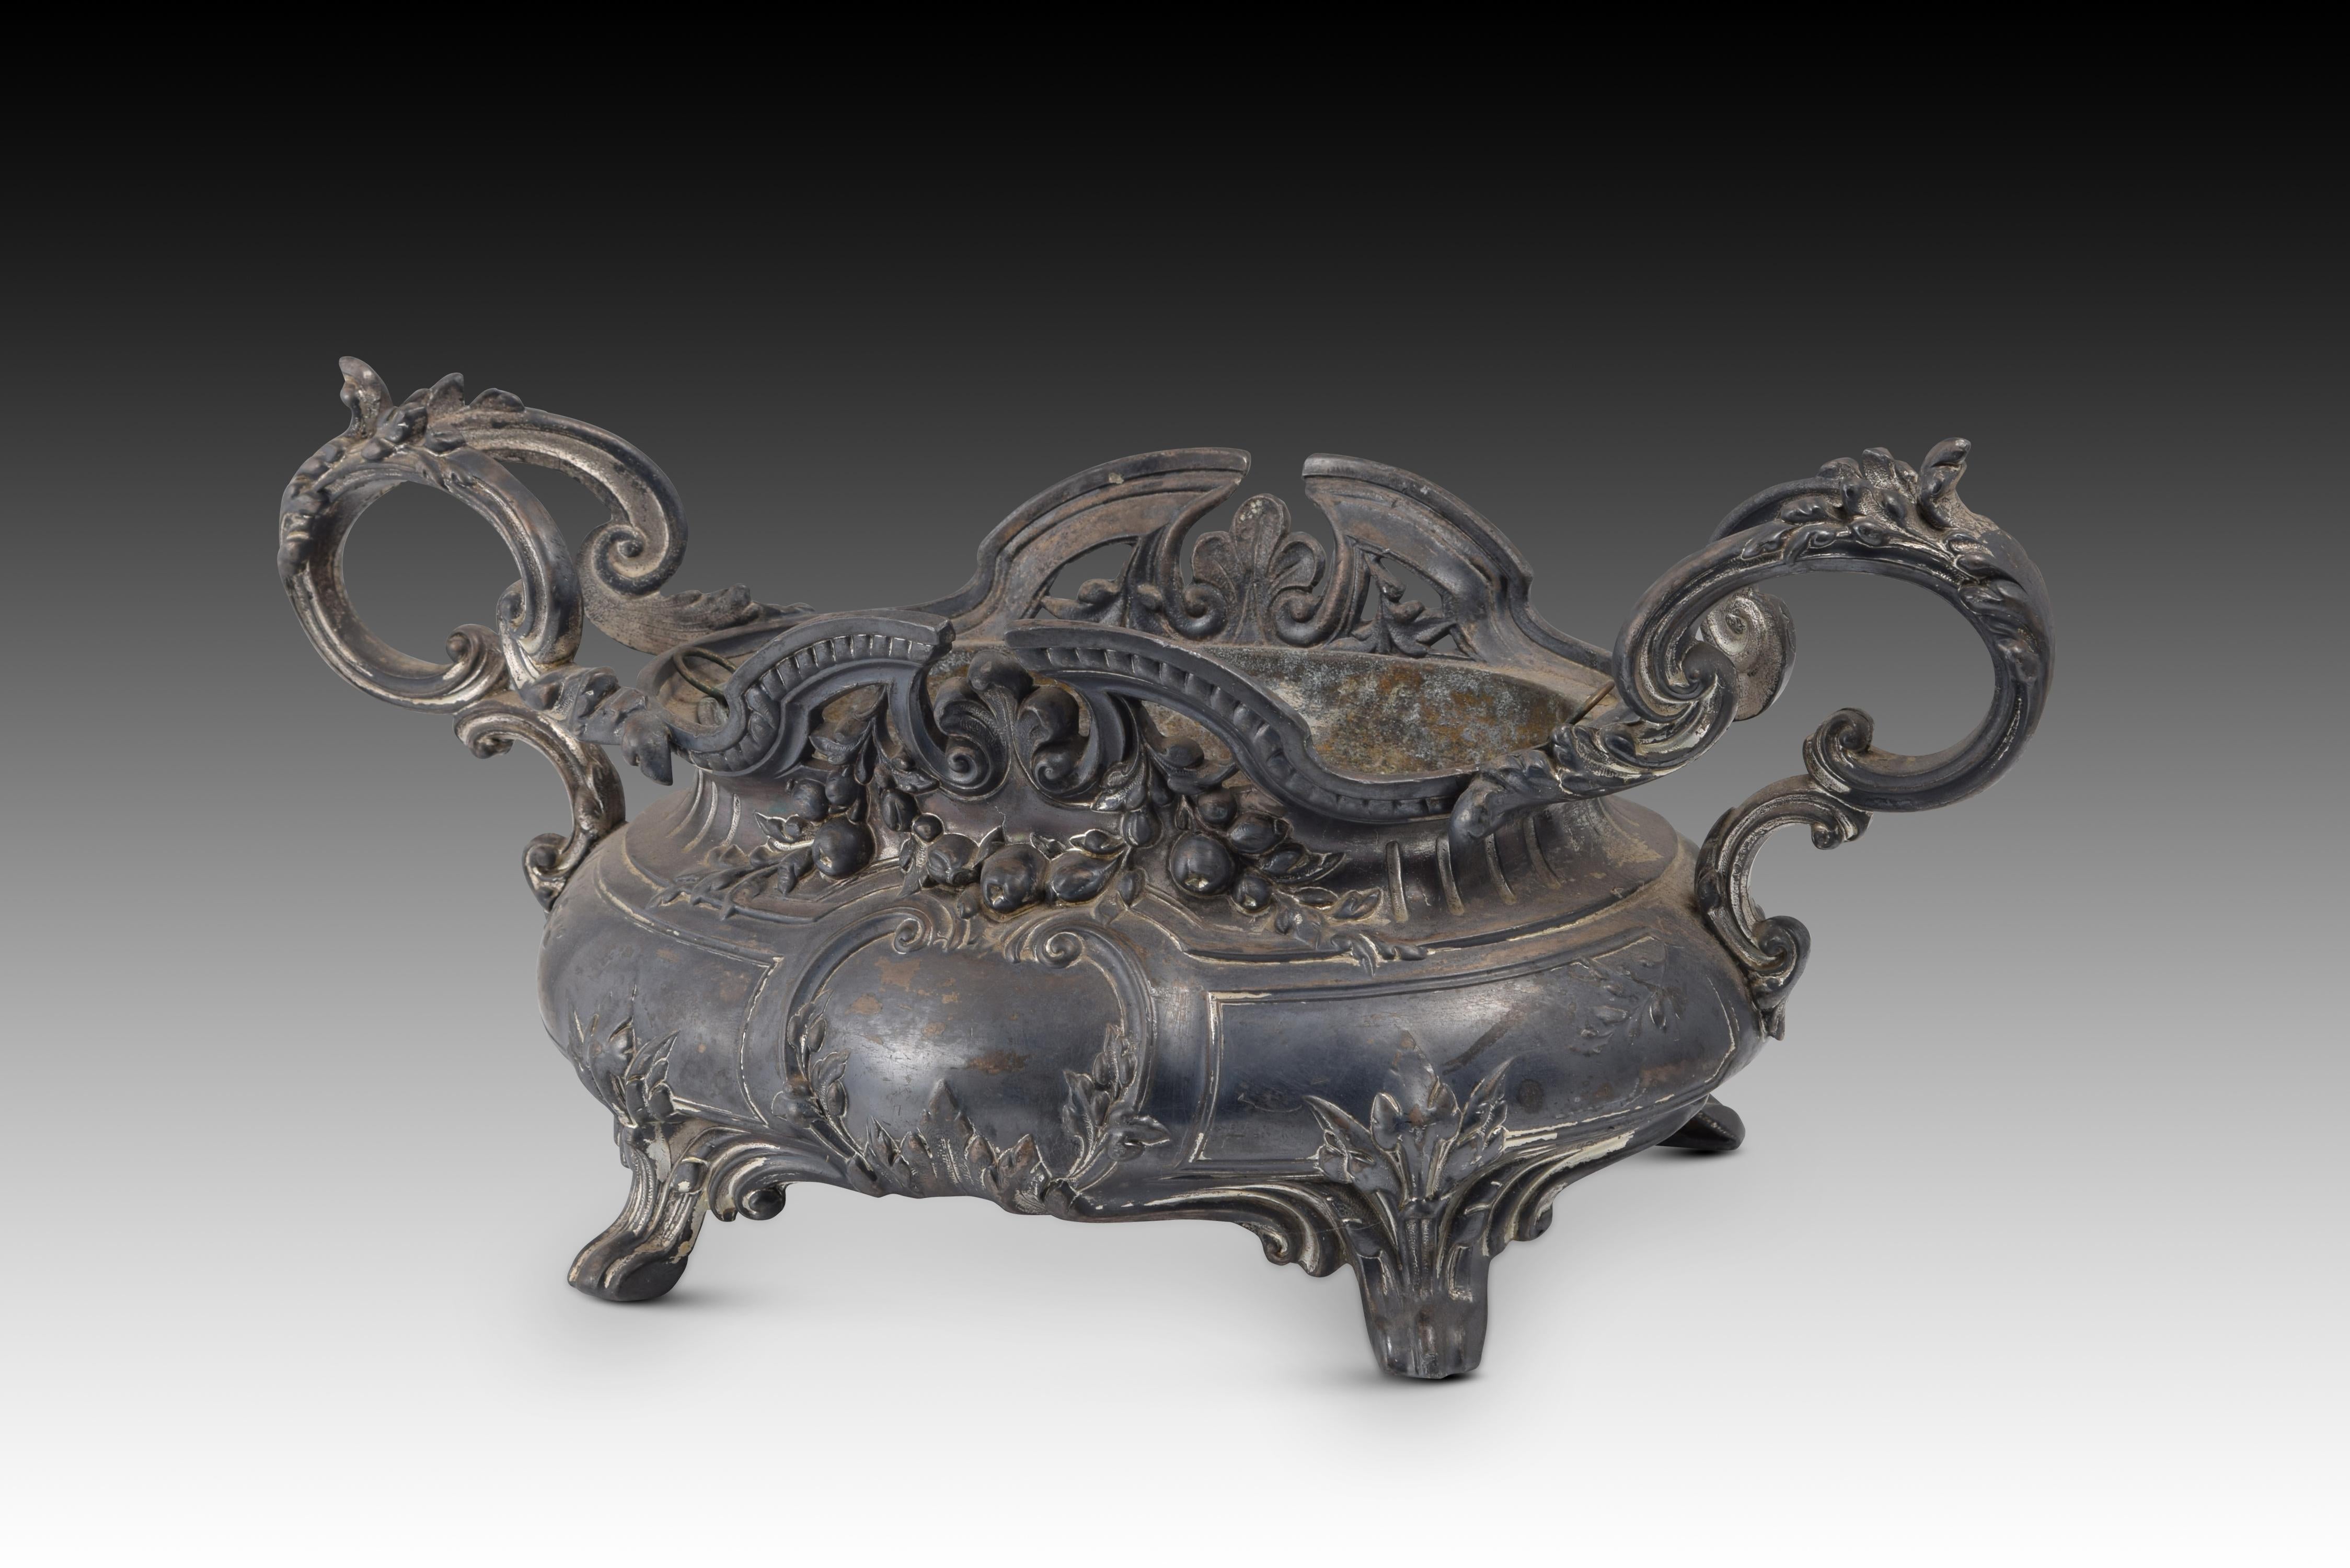 Centerpiece. calamine. France, 19th century. 
Centerpiece made of calamine slightly raised on legs and that has two handles on the sides. The elaborate and delicate decoration based on architectural elements, garlands, plant motifs and scrolls (all